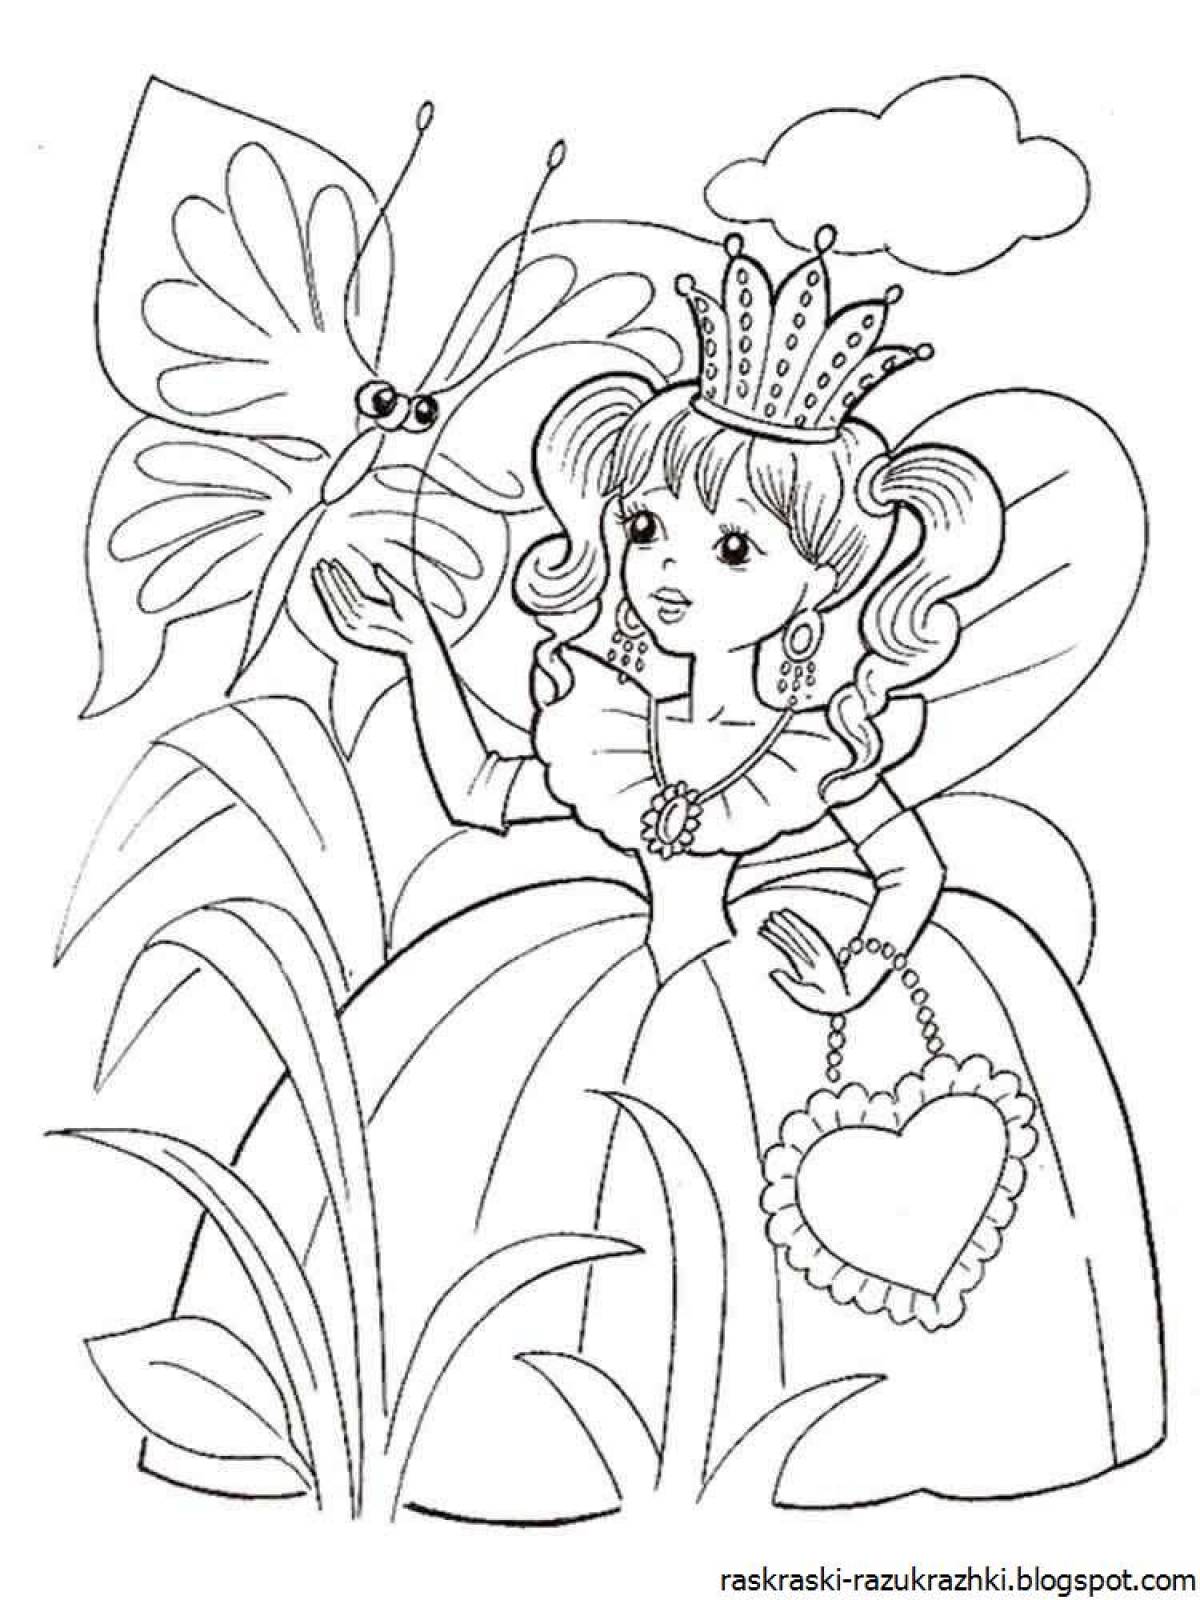 Adorable princess coloring book for kids 5-6 years old